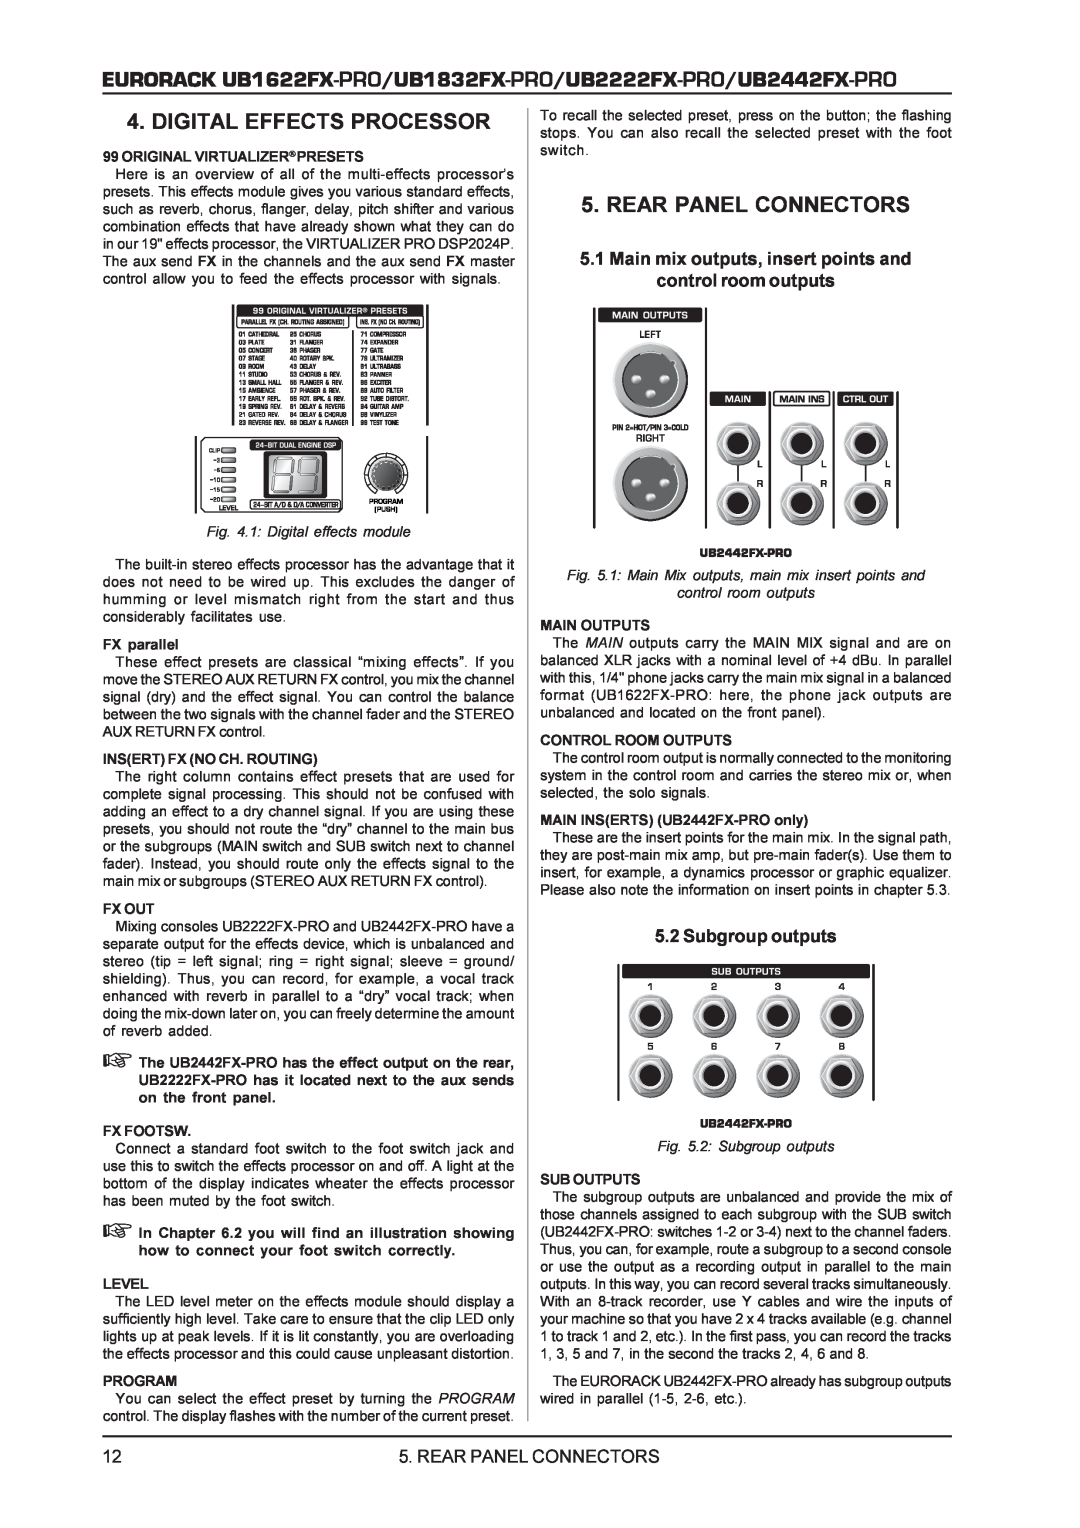 Behringer UB2442FX-PRO manual Subgroup outputs, Rear Panel Connectors, 1 Digital effects module, control room outputs 